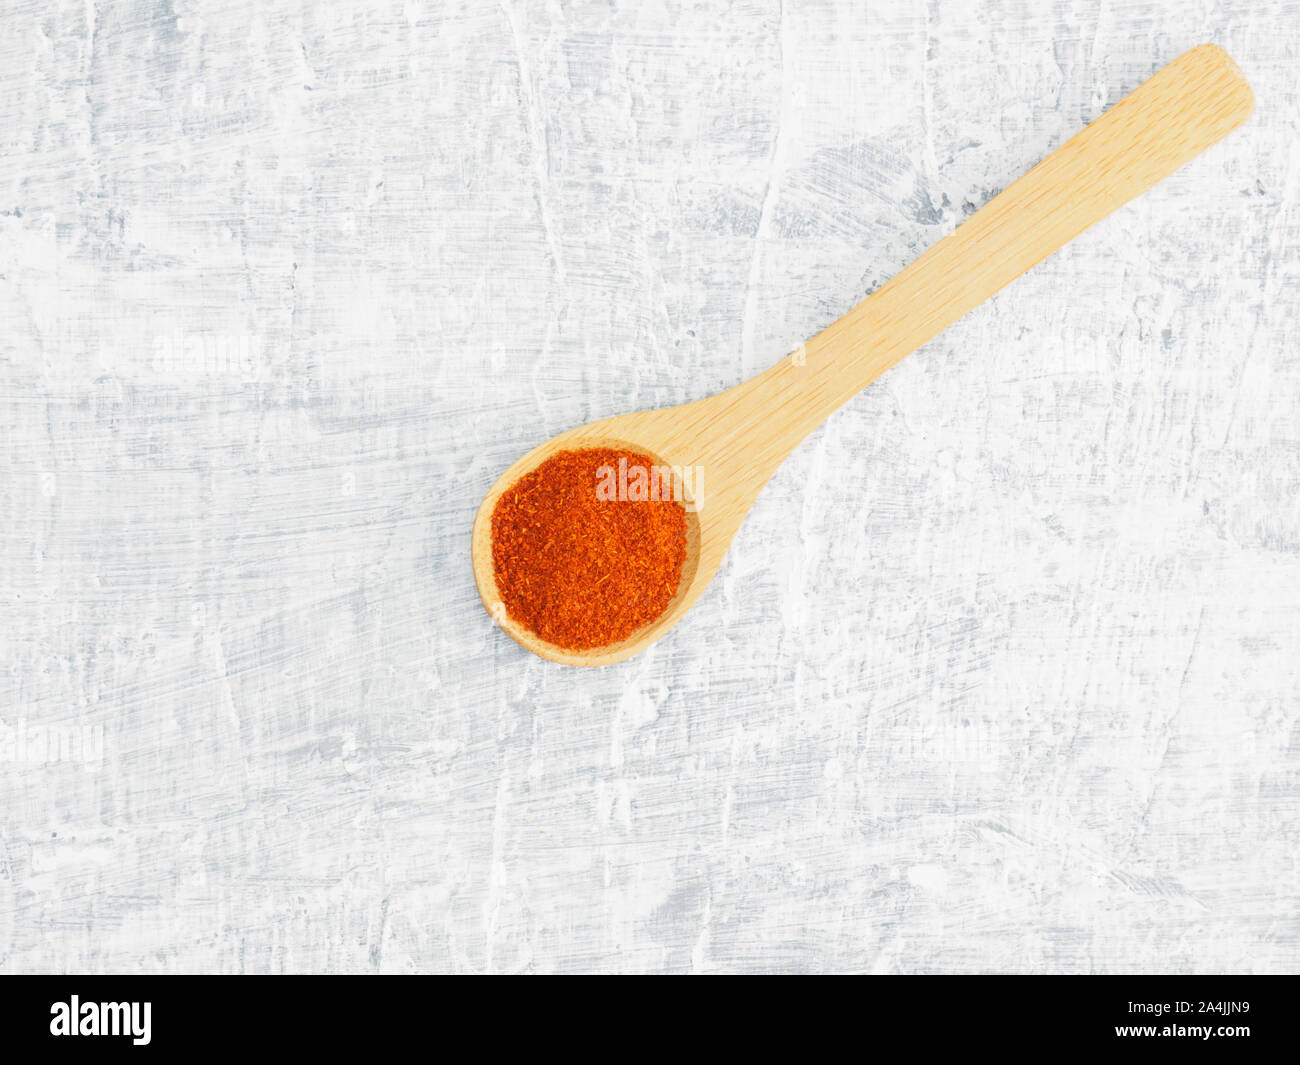 Spices help maintain good health and improve appetite, top view on white concrete background. Red chili pepper in wooden spoon. Modern apothecary, nat Stock Photo